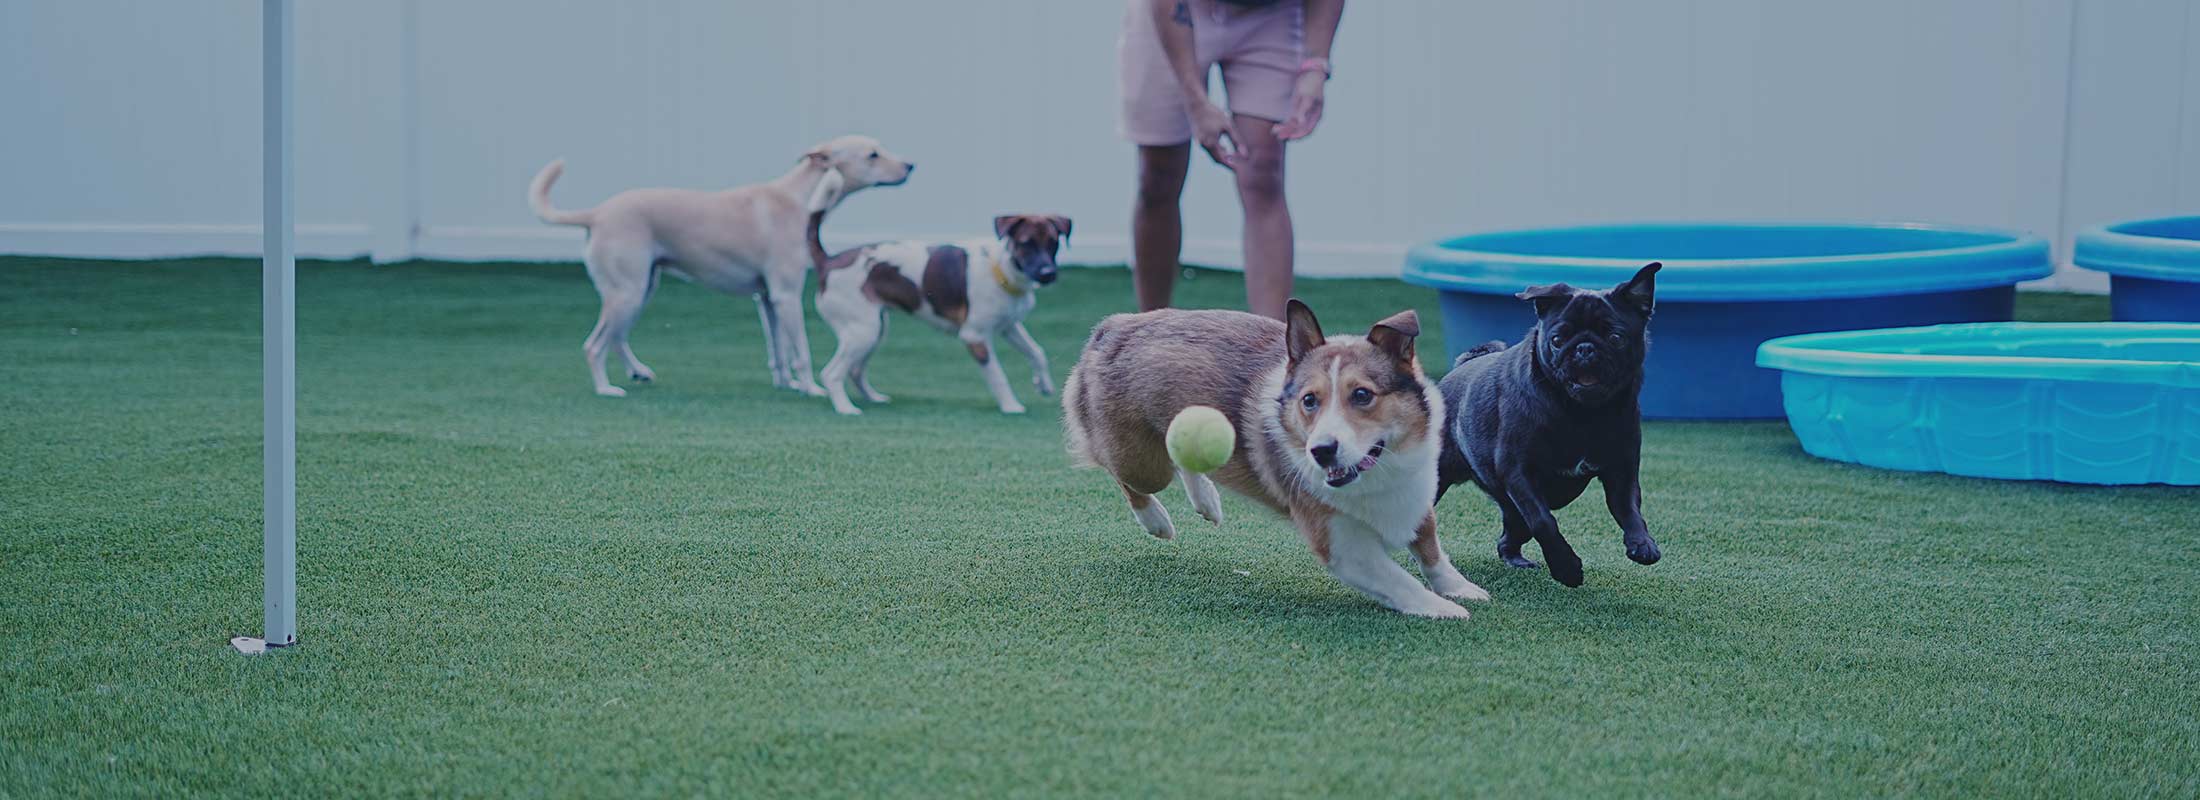 image of Dogs playing at Tails of Hawaii